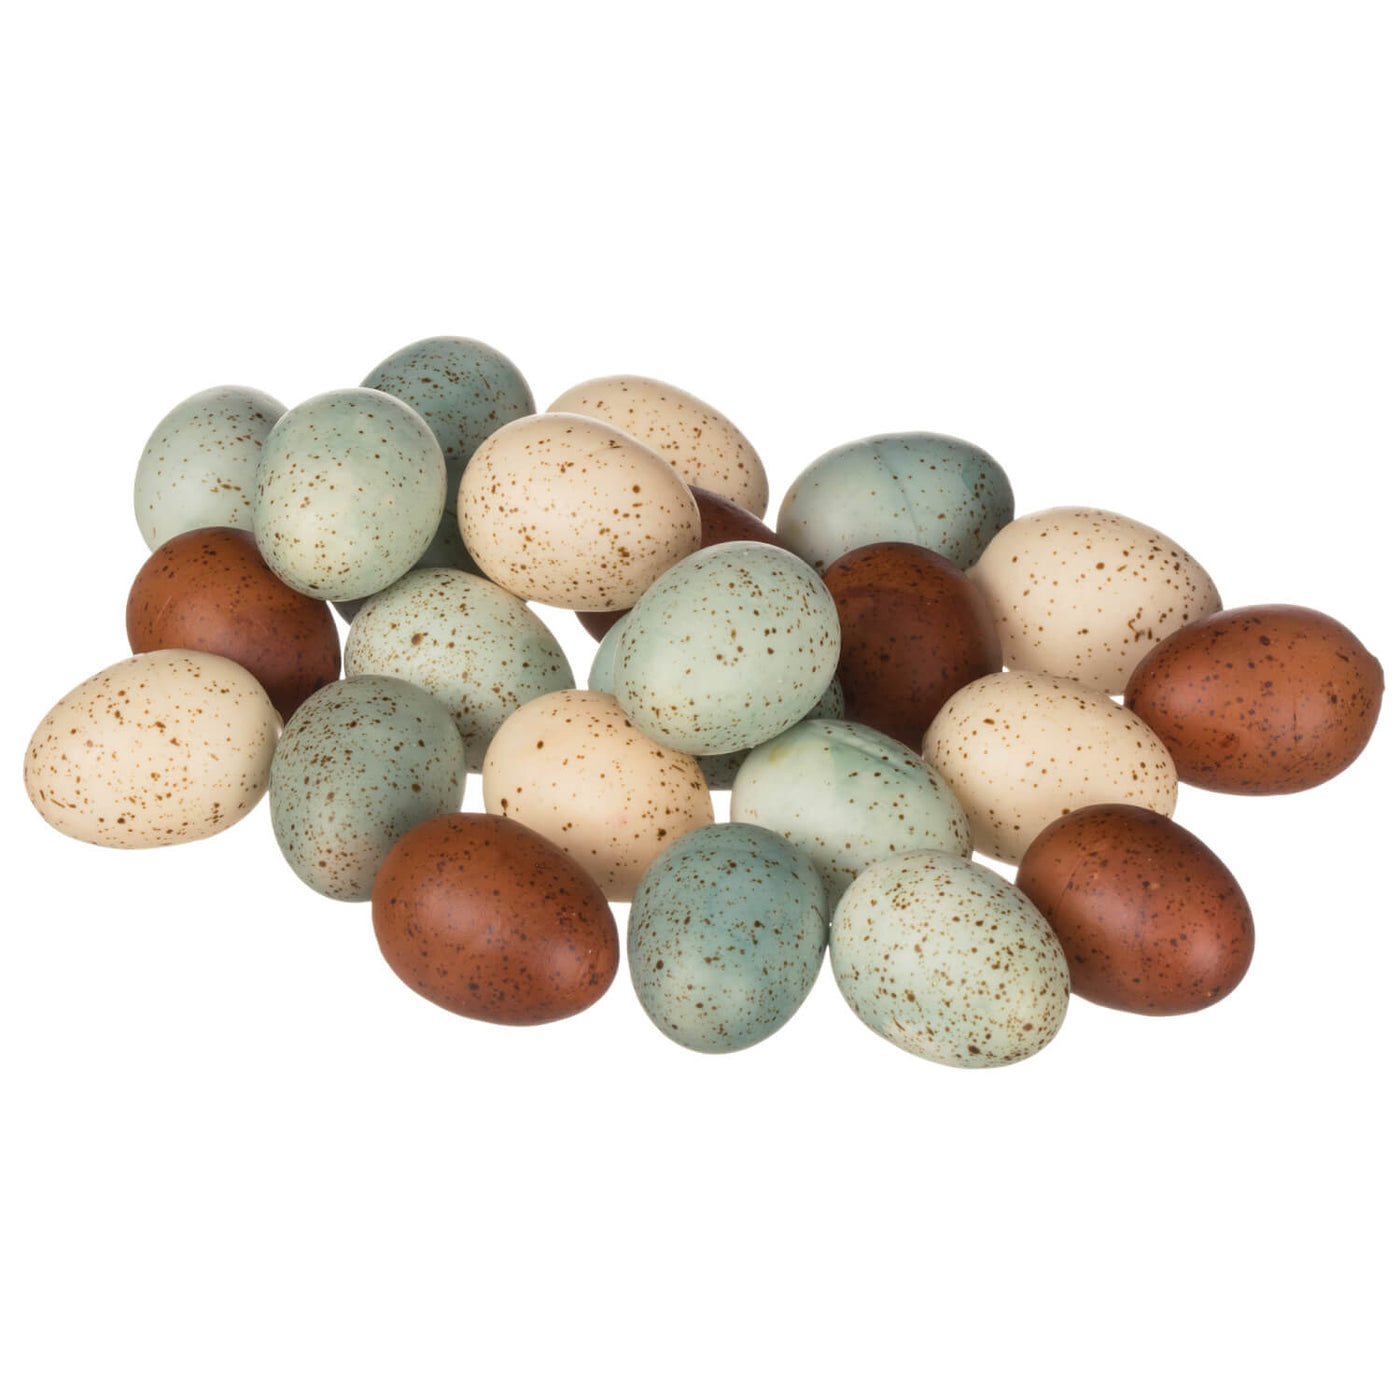 Colored Eggs Bag of 24